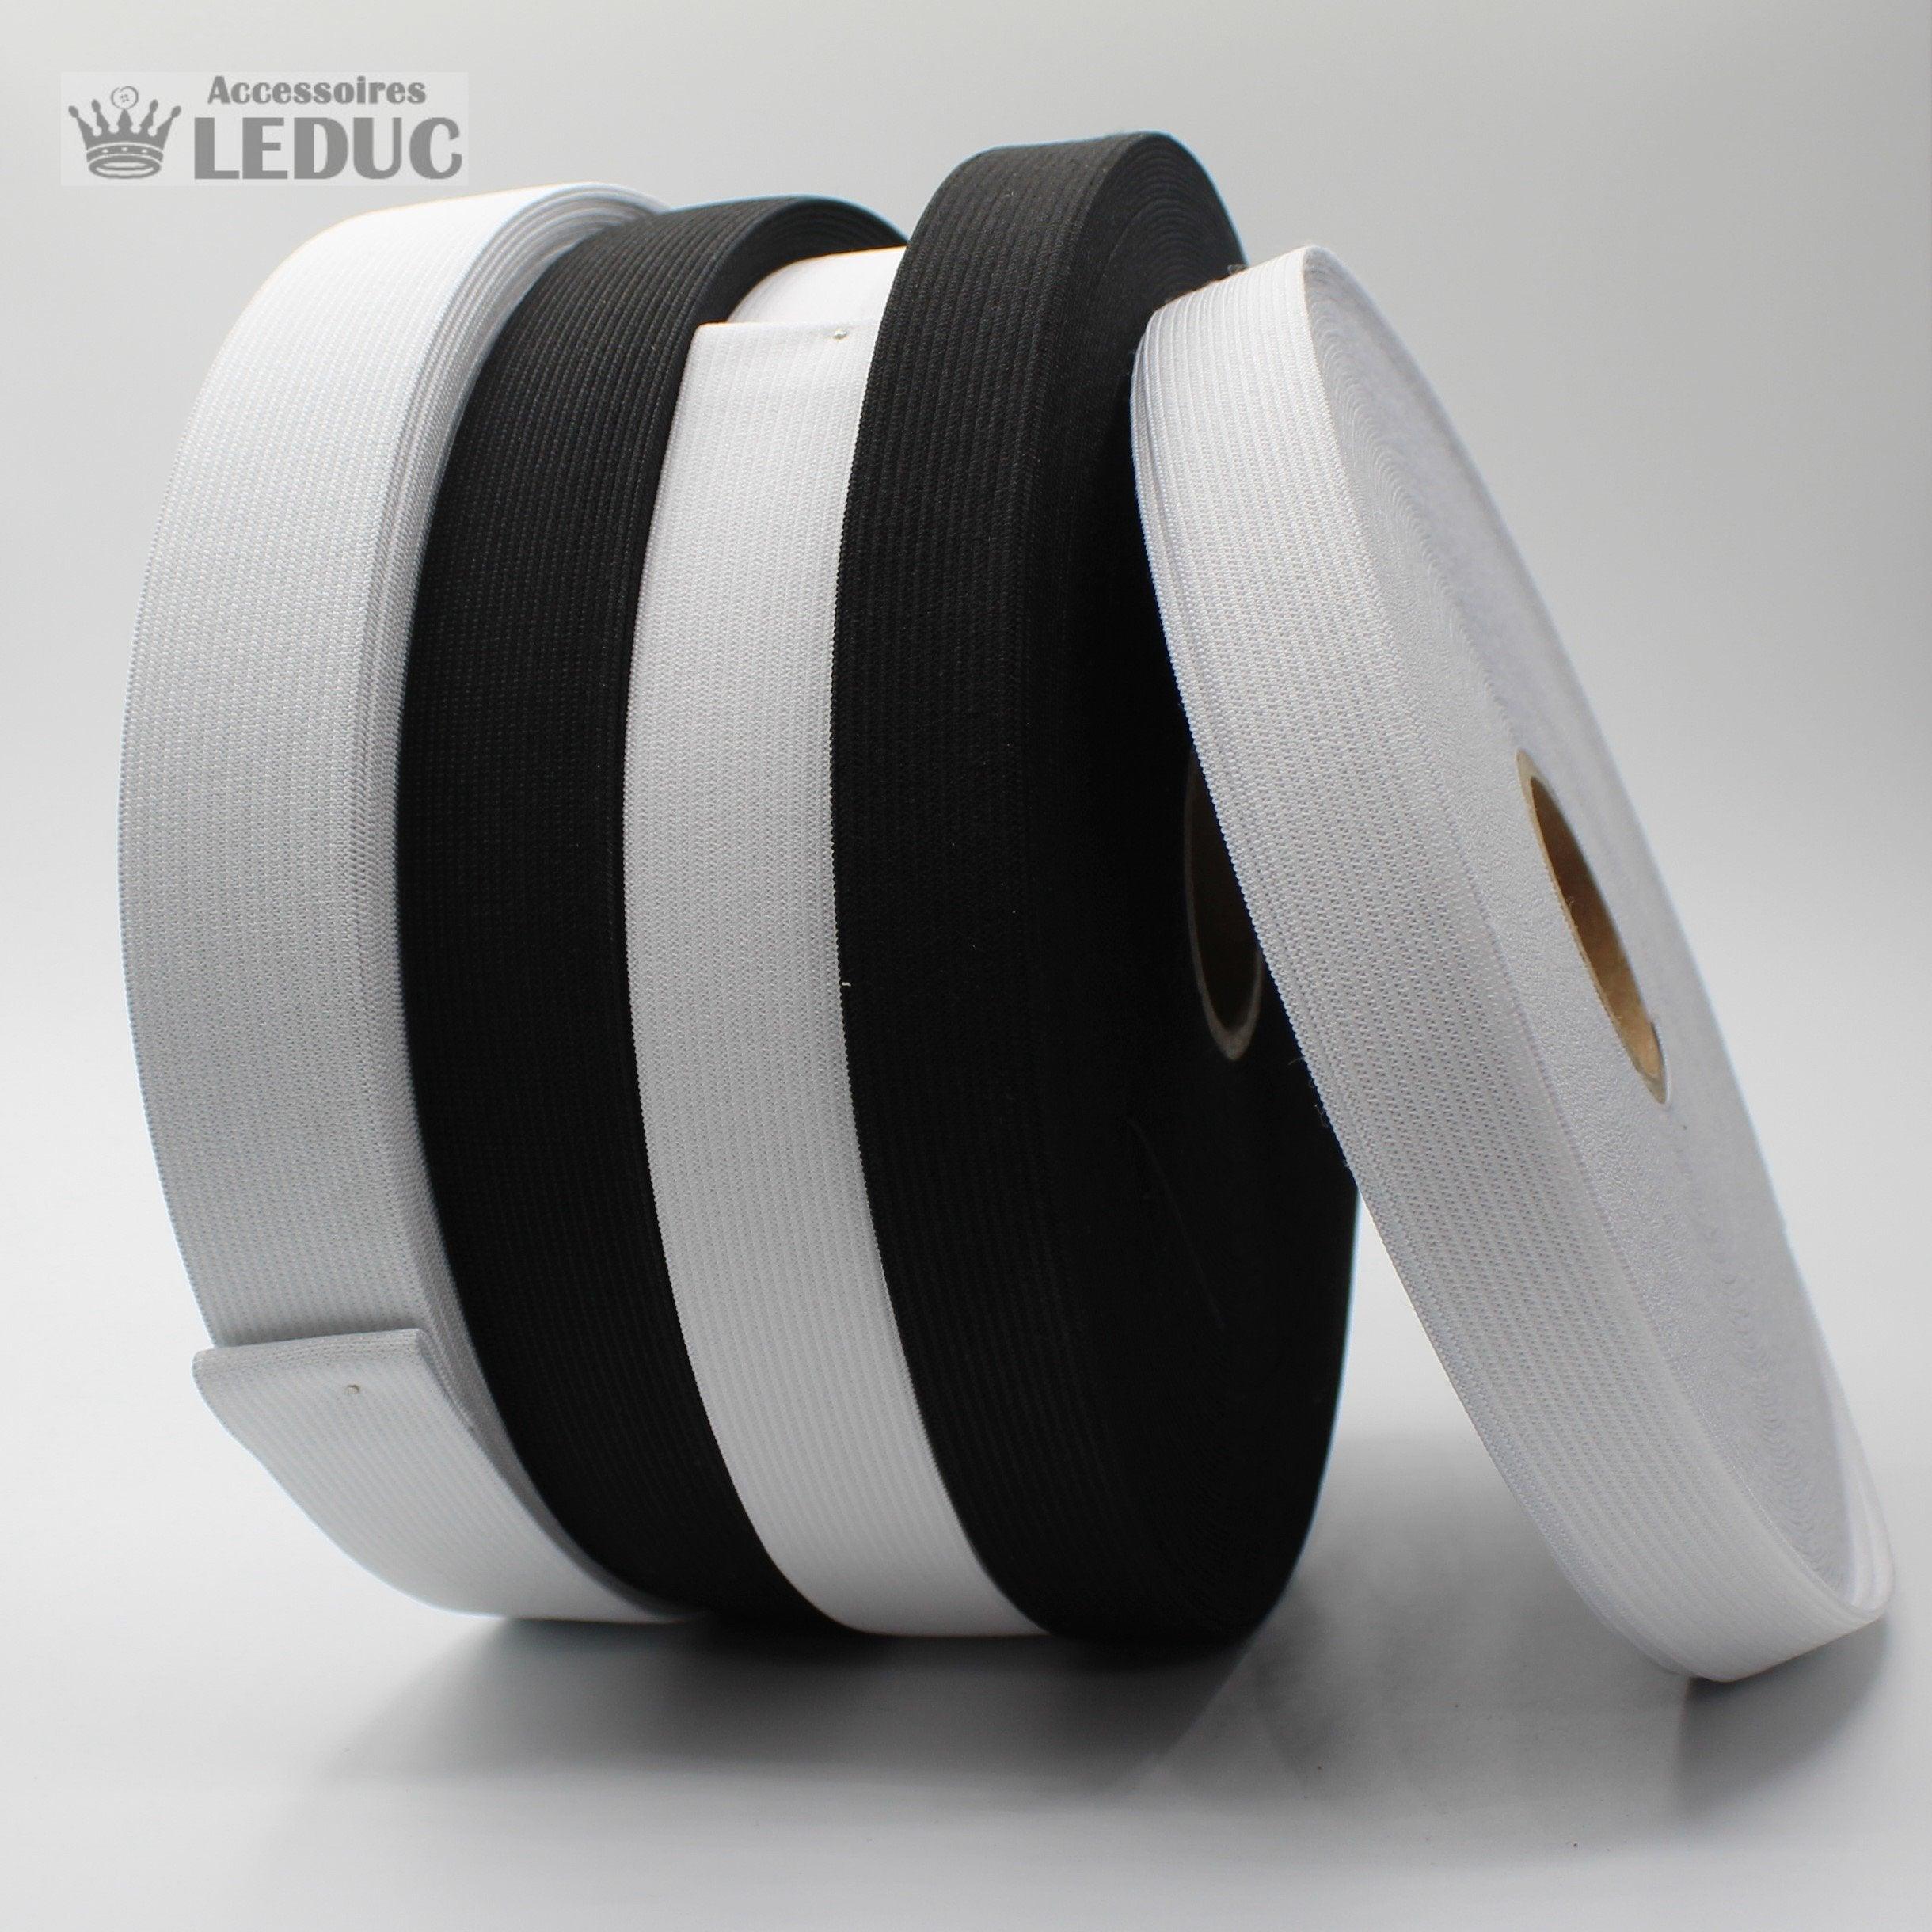 Knitted Elastic Black or White - Rolls of 25 meters - ACCESSOIRES LEDUC